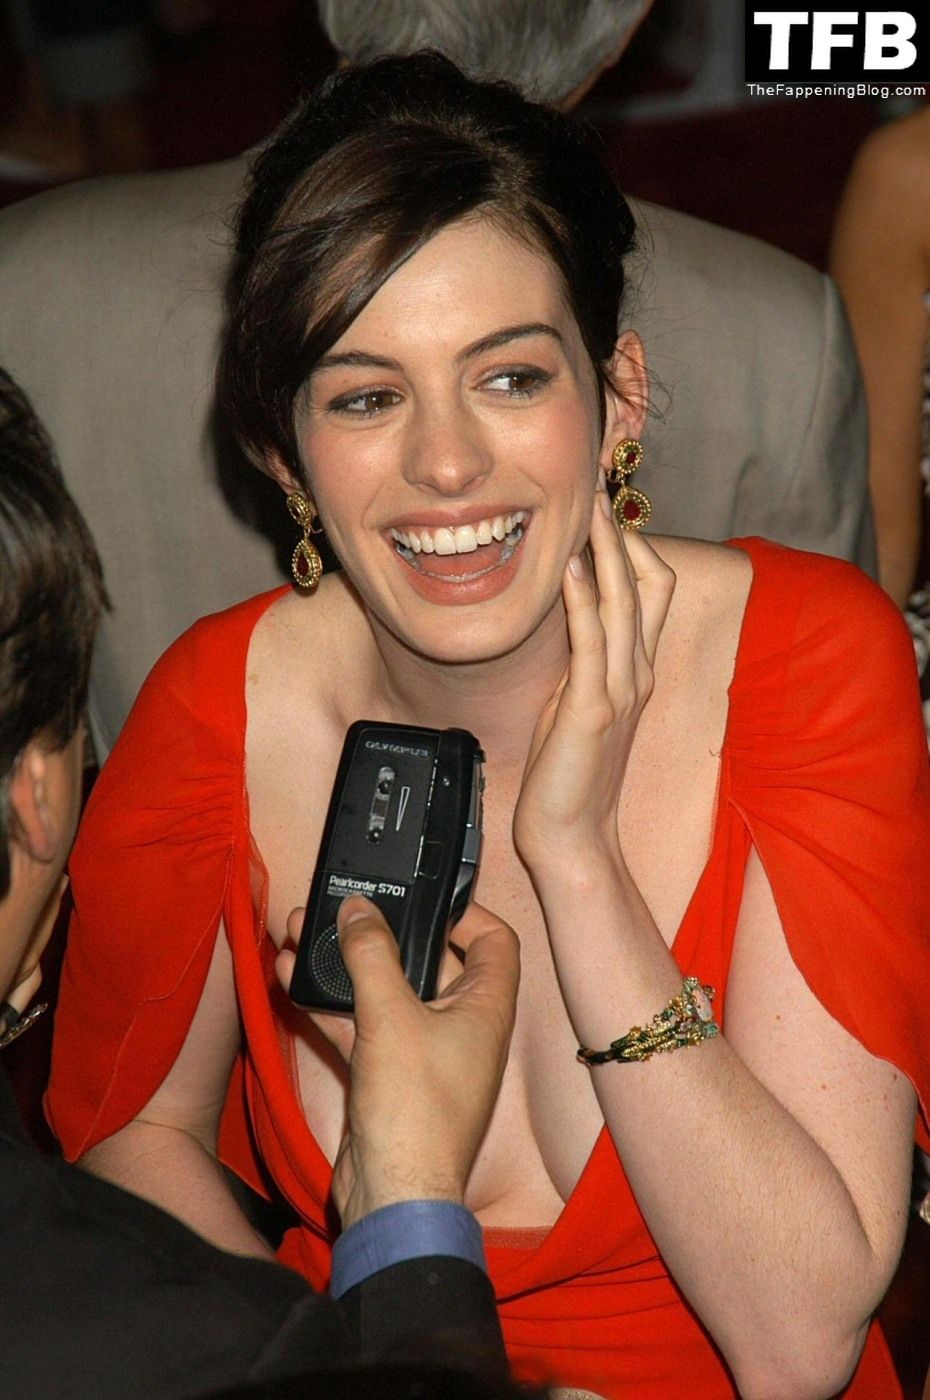 anne-hathaway-nude-sexy-20-thefappeningblog.com_.jpg